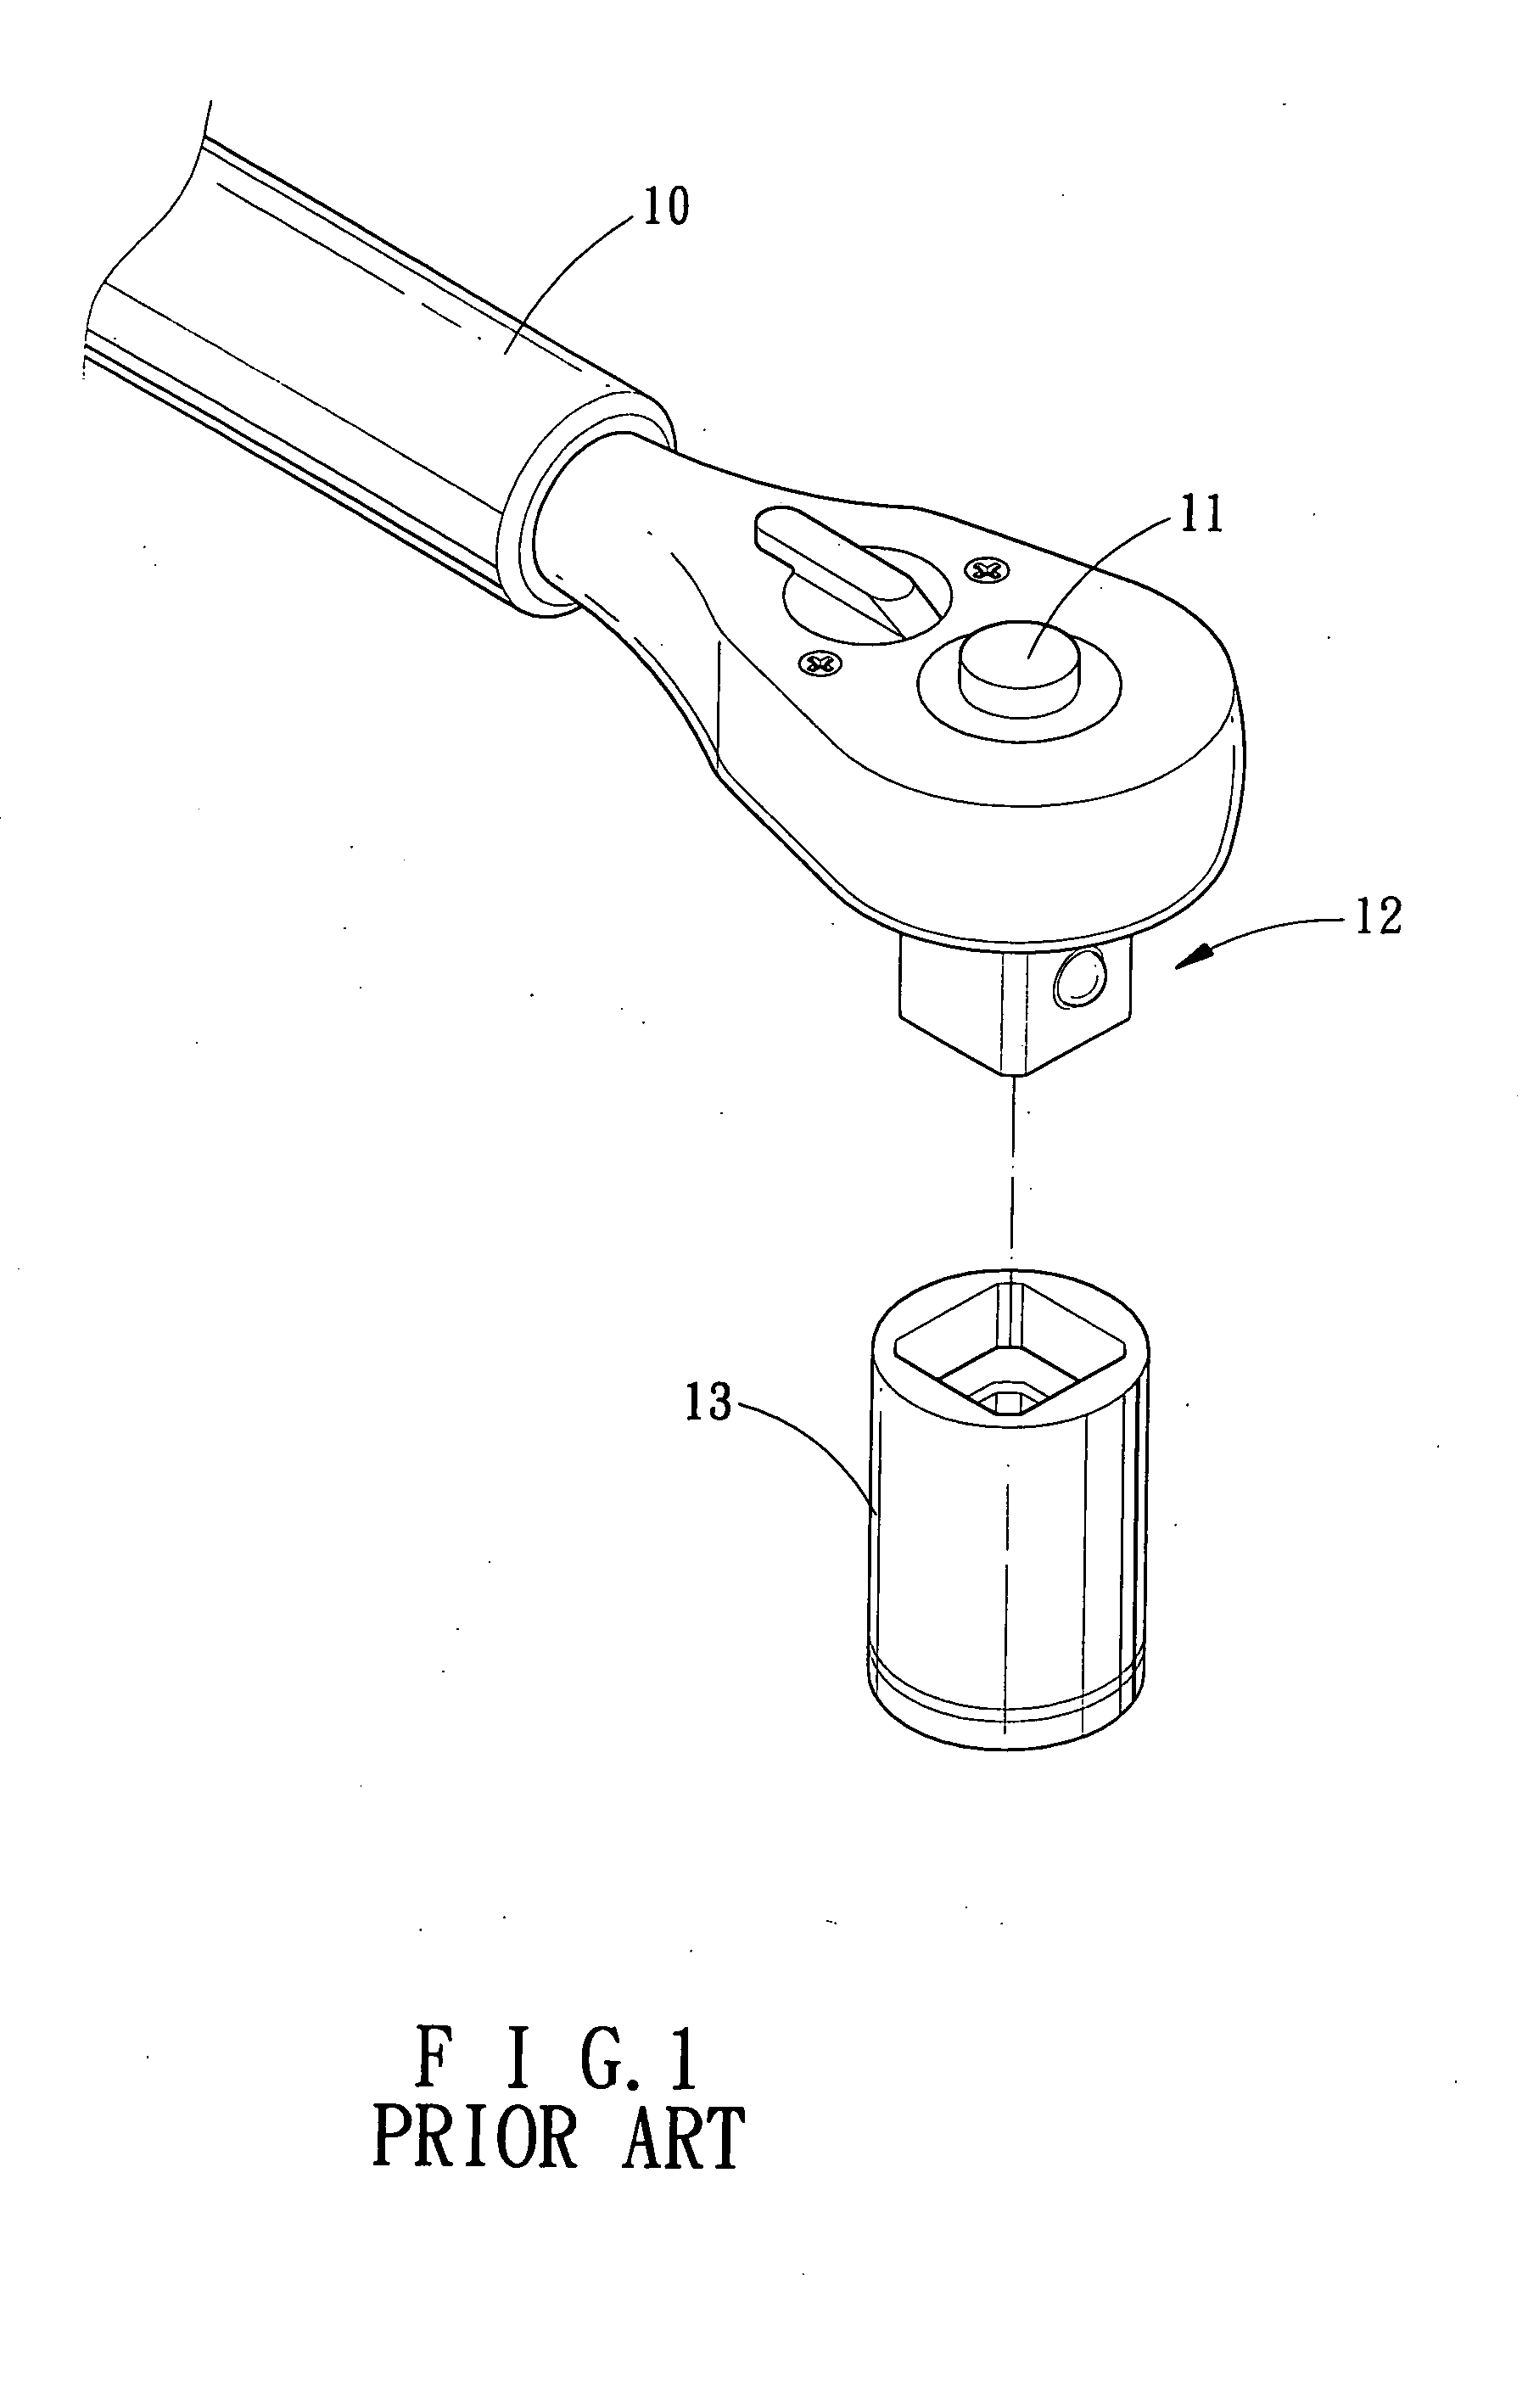 Quick-release socket adapter for a socket wrench